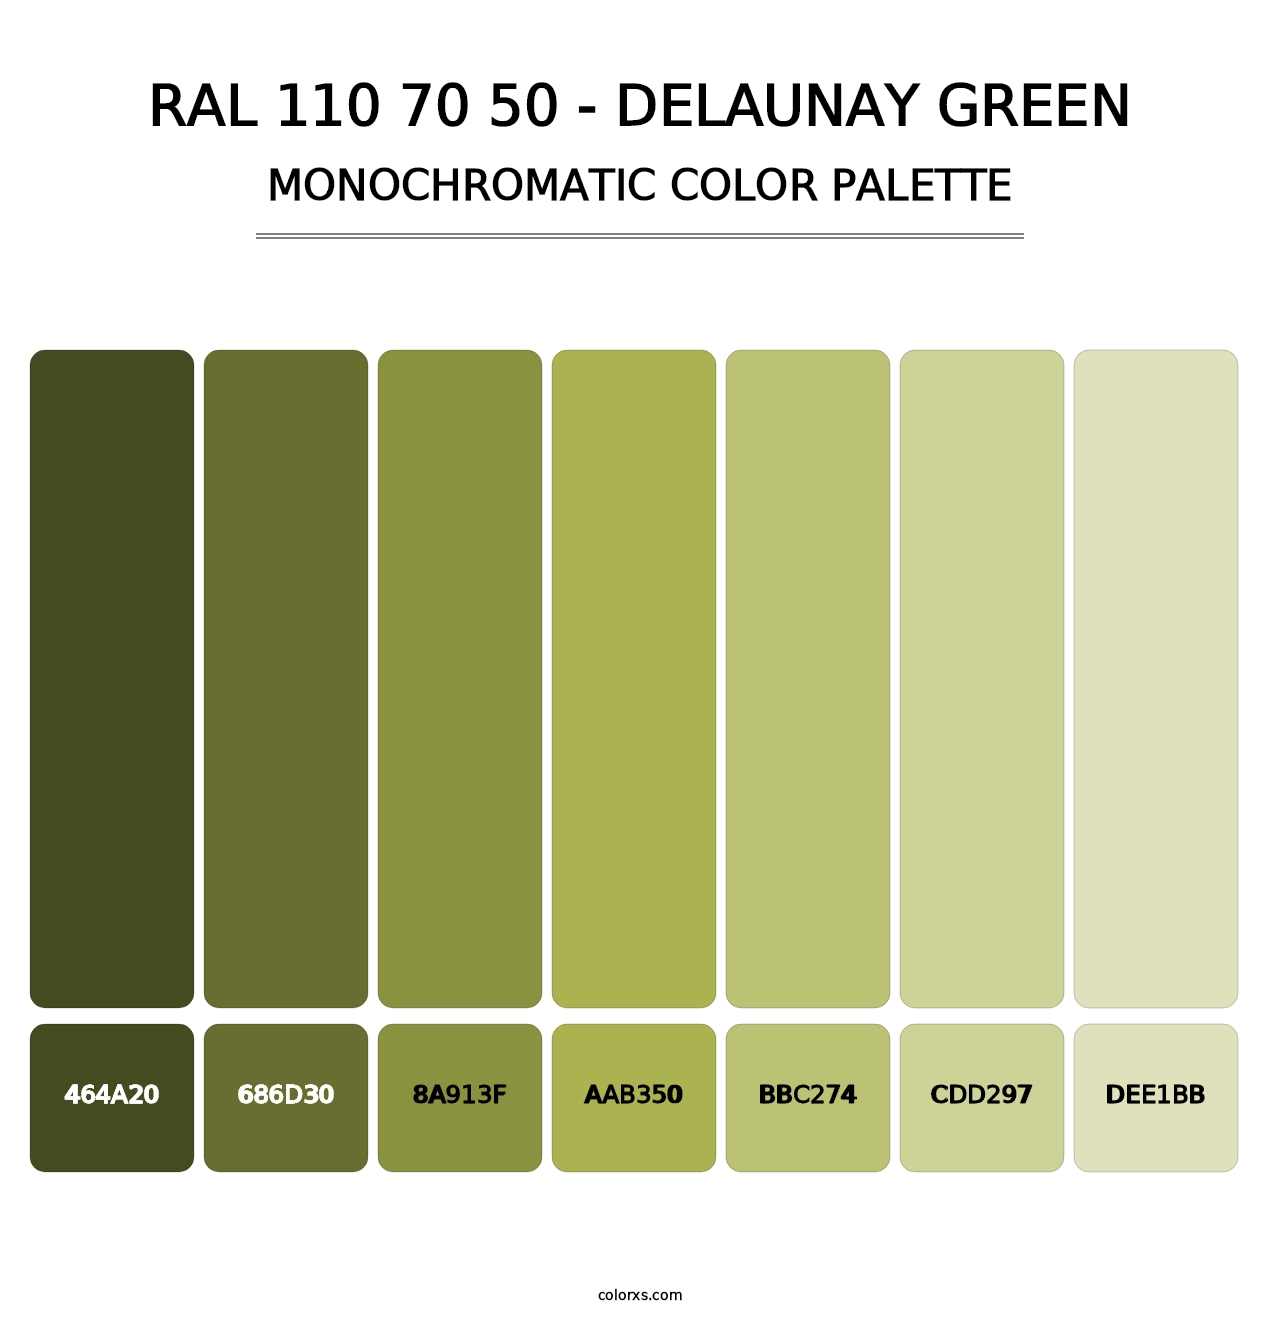 RAL 110 70 50 - Delaunay Green - Monochromatic Color Palette